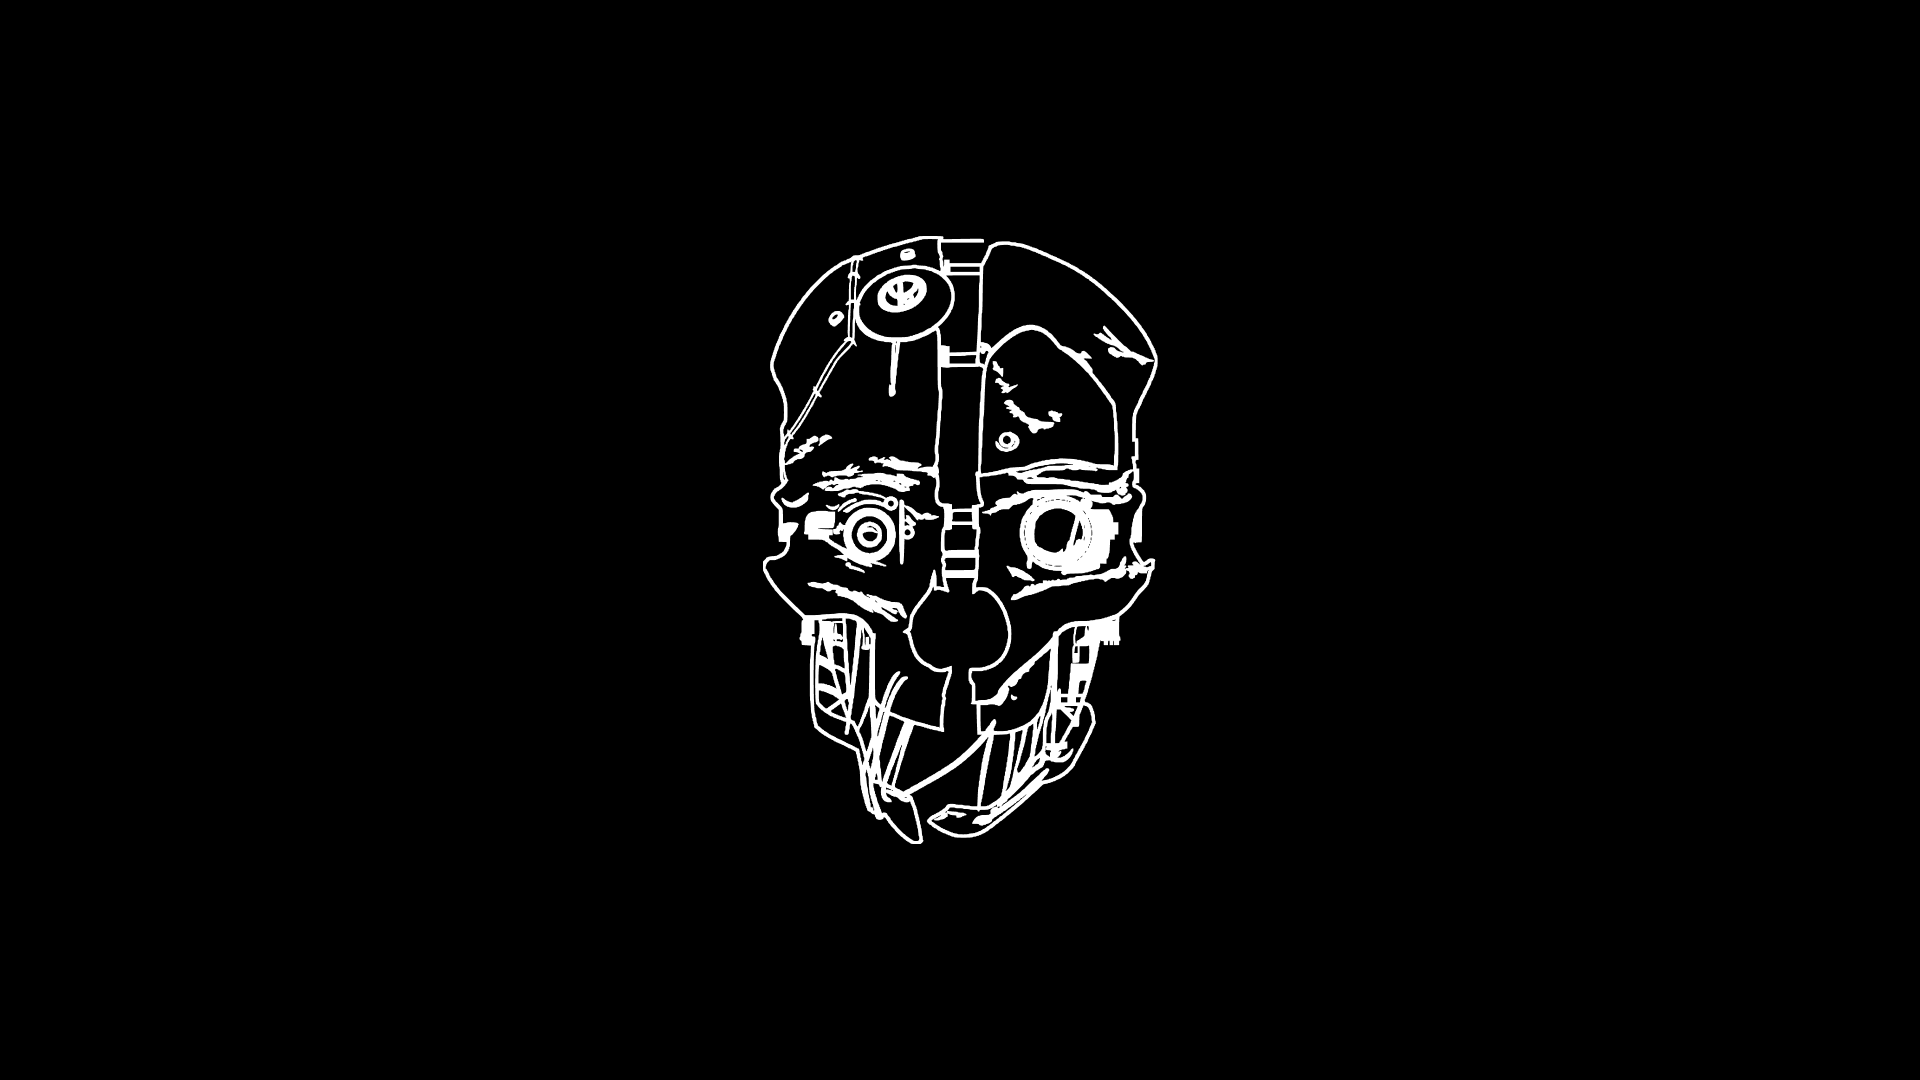 Dishonored Mask Wallpaper [1920x1080] Sizes in comments